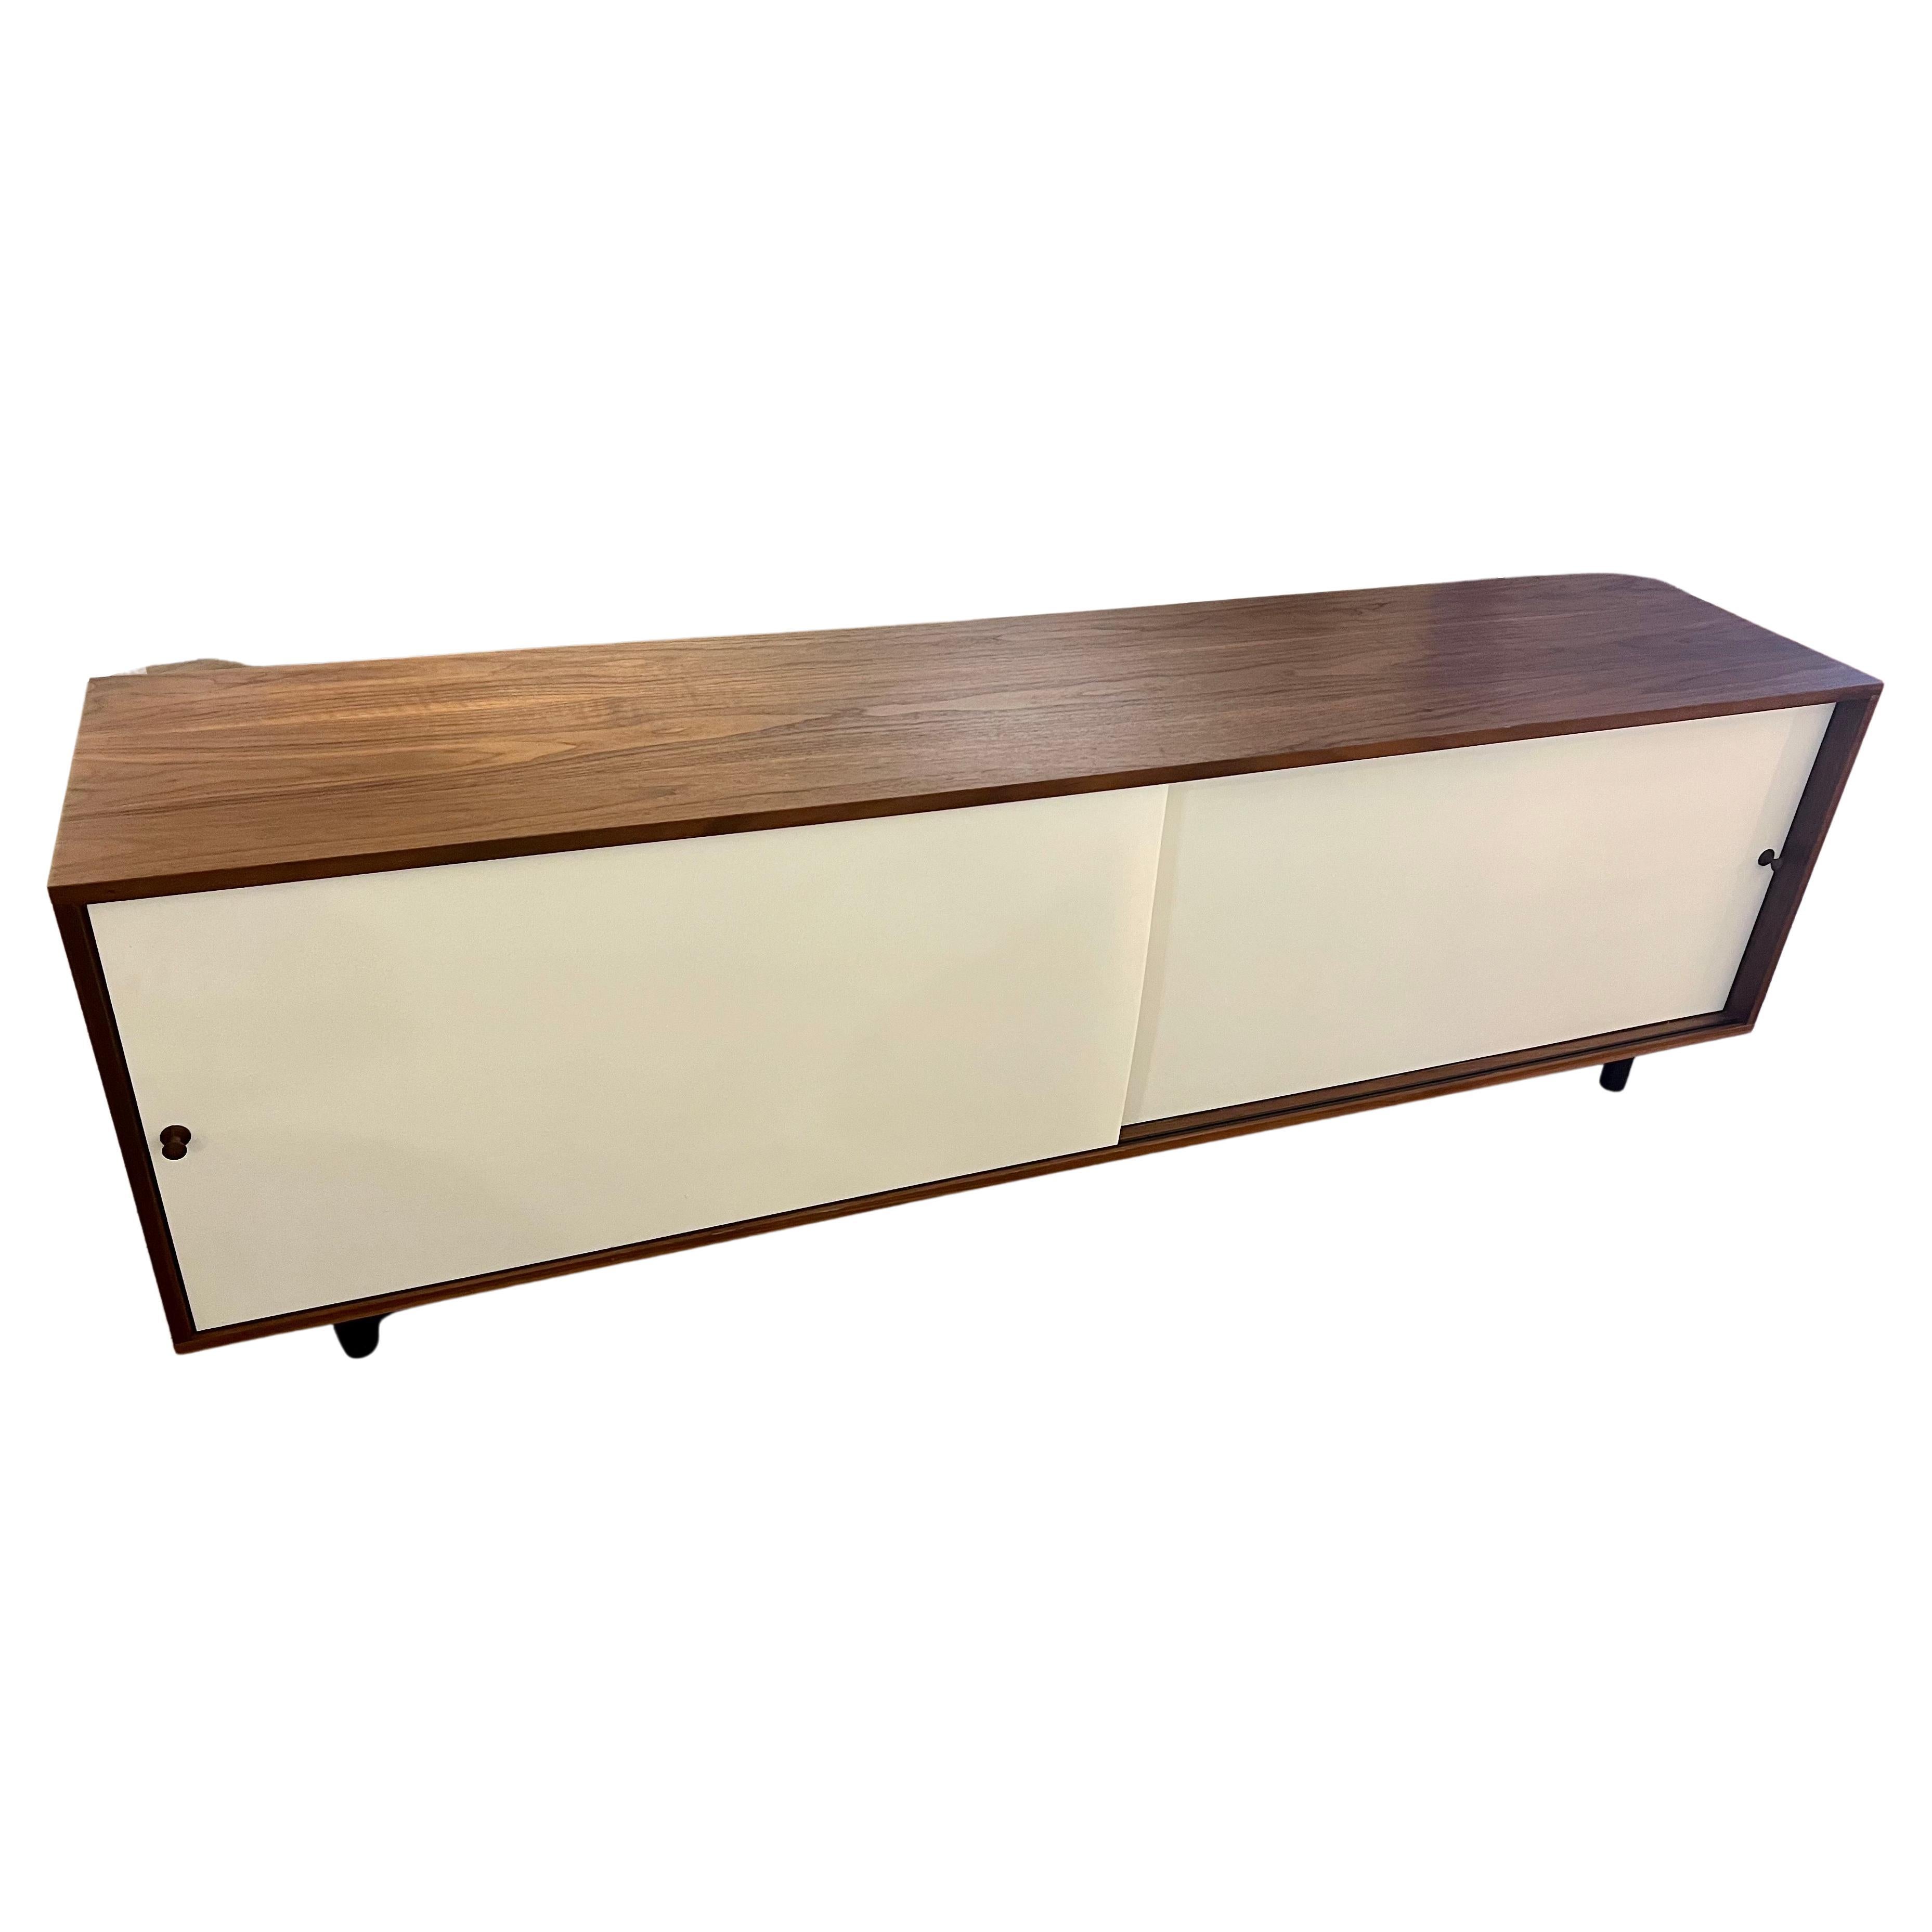 Very cool dramatic contemporary walnut case credenza with plastic doors and colorful drawers, custom-made with black piping metal legs.